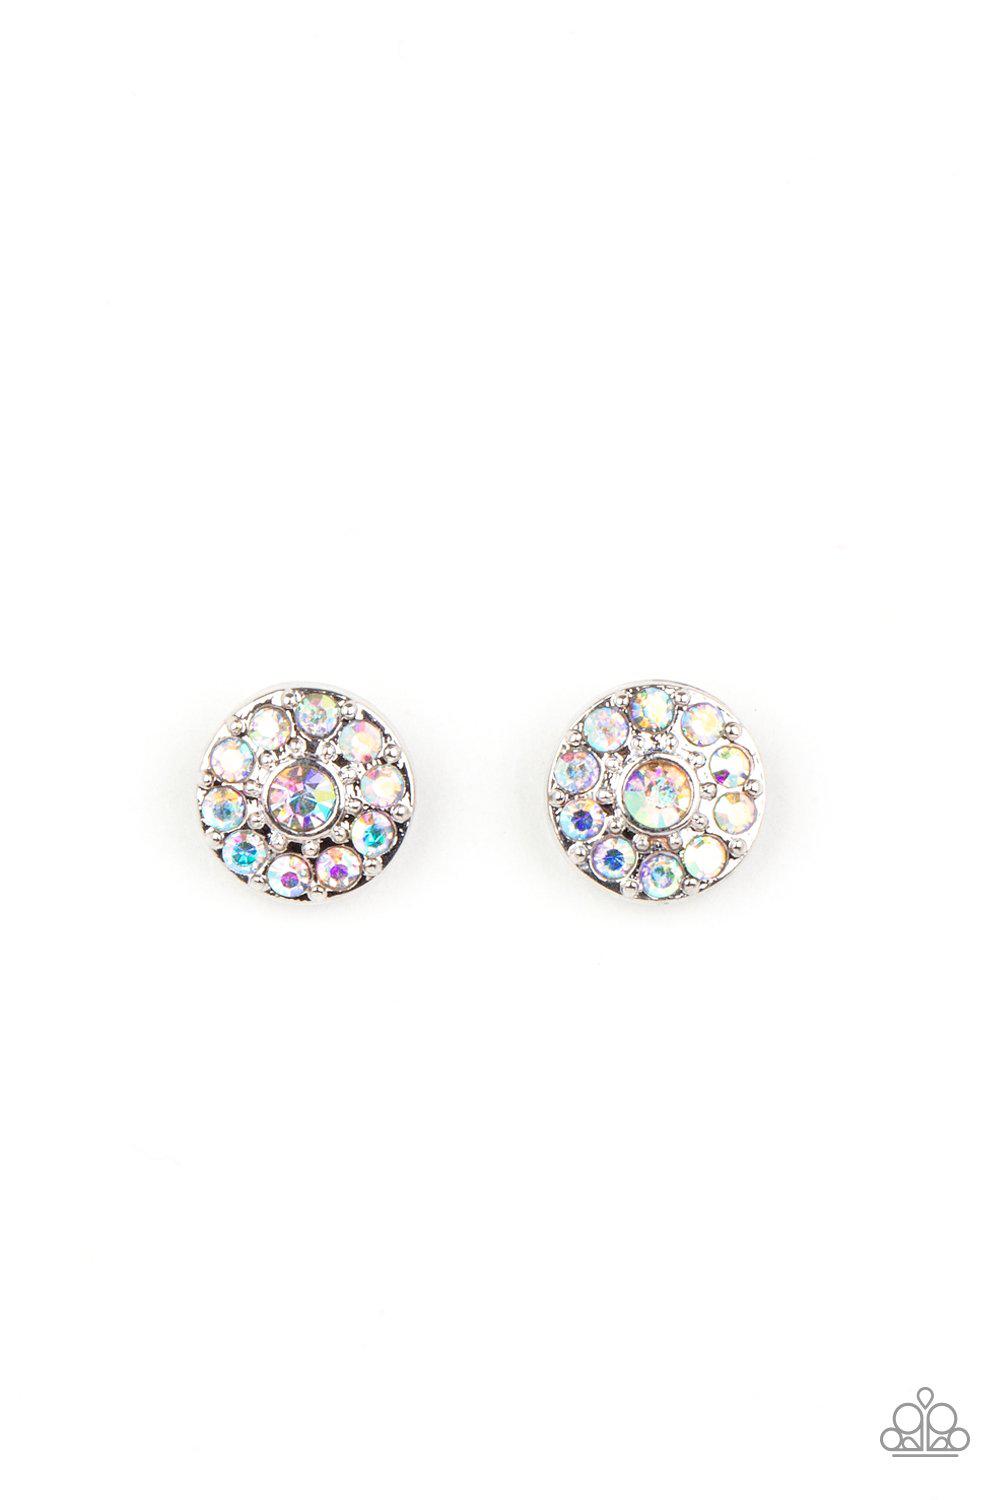 Starlet Shimmer Children&#39;s Iridescent Rhinestone Post Earrings v3 - Paparazzi Accessories (set of 10 pairs)- lightbox - CarasShop.com - $5 Jewelry by Cara Jewels